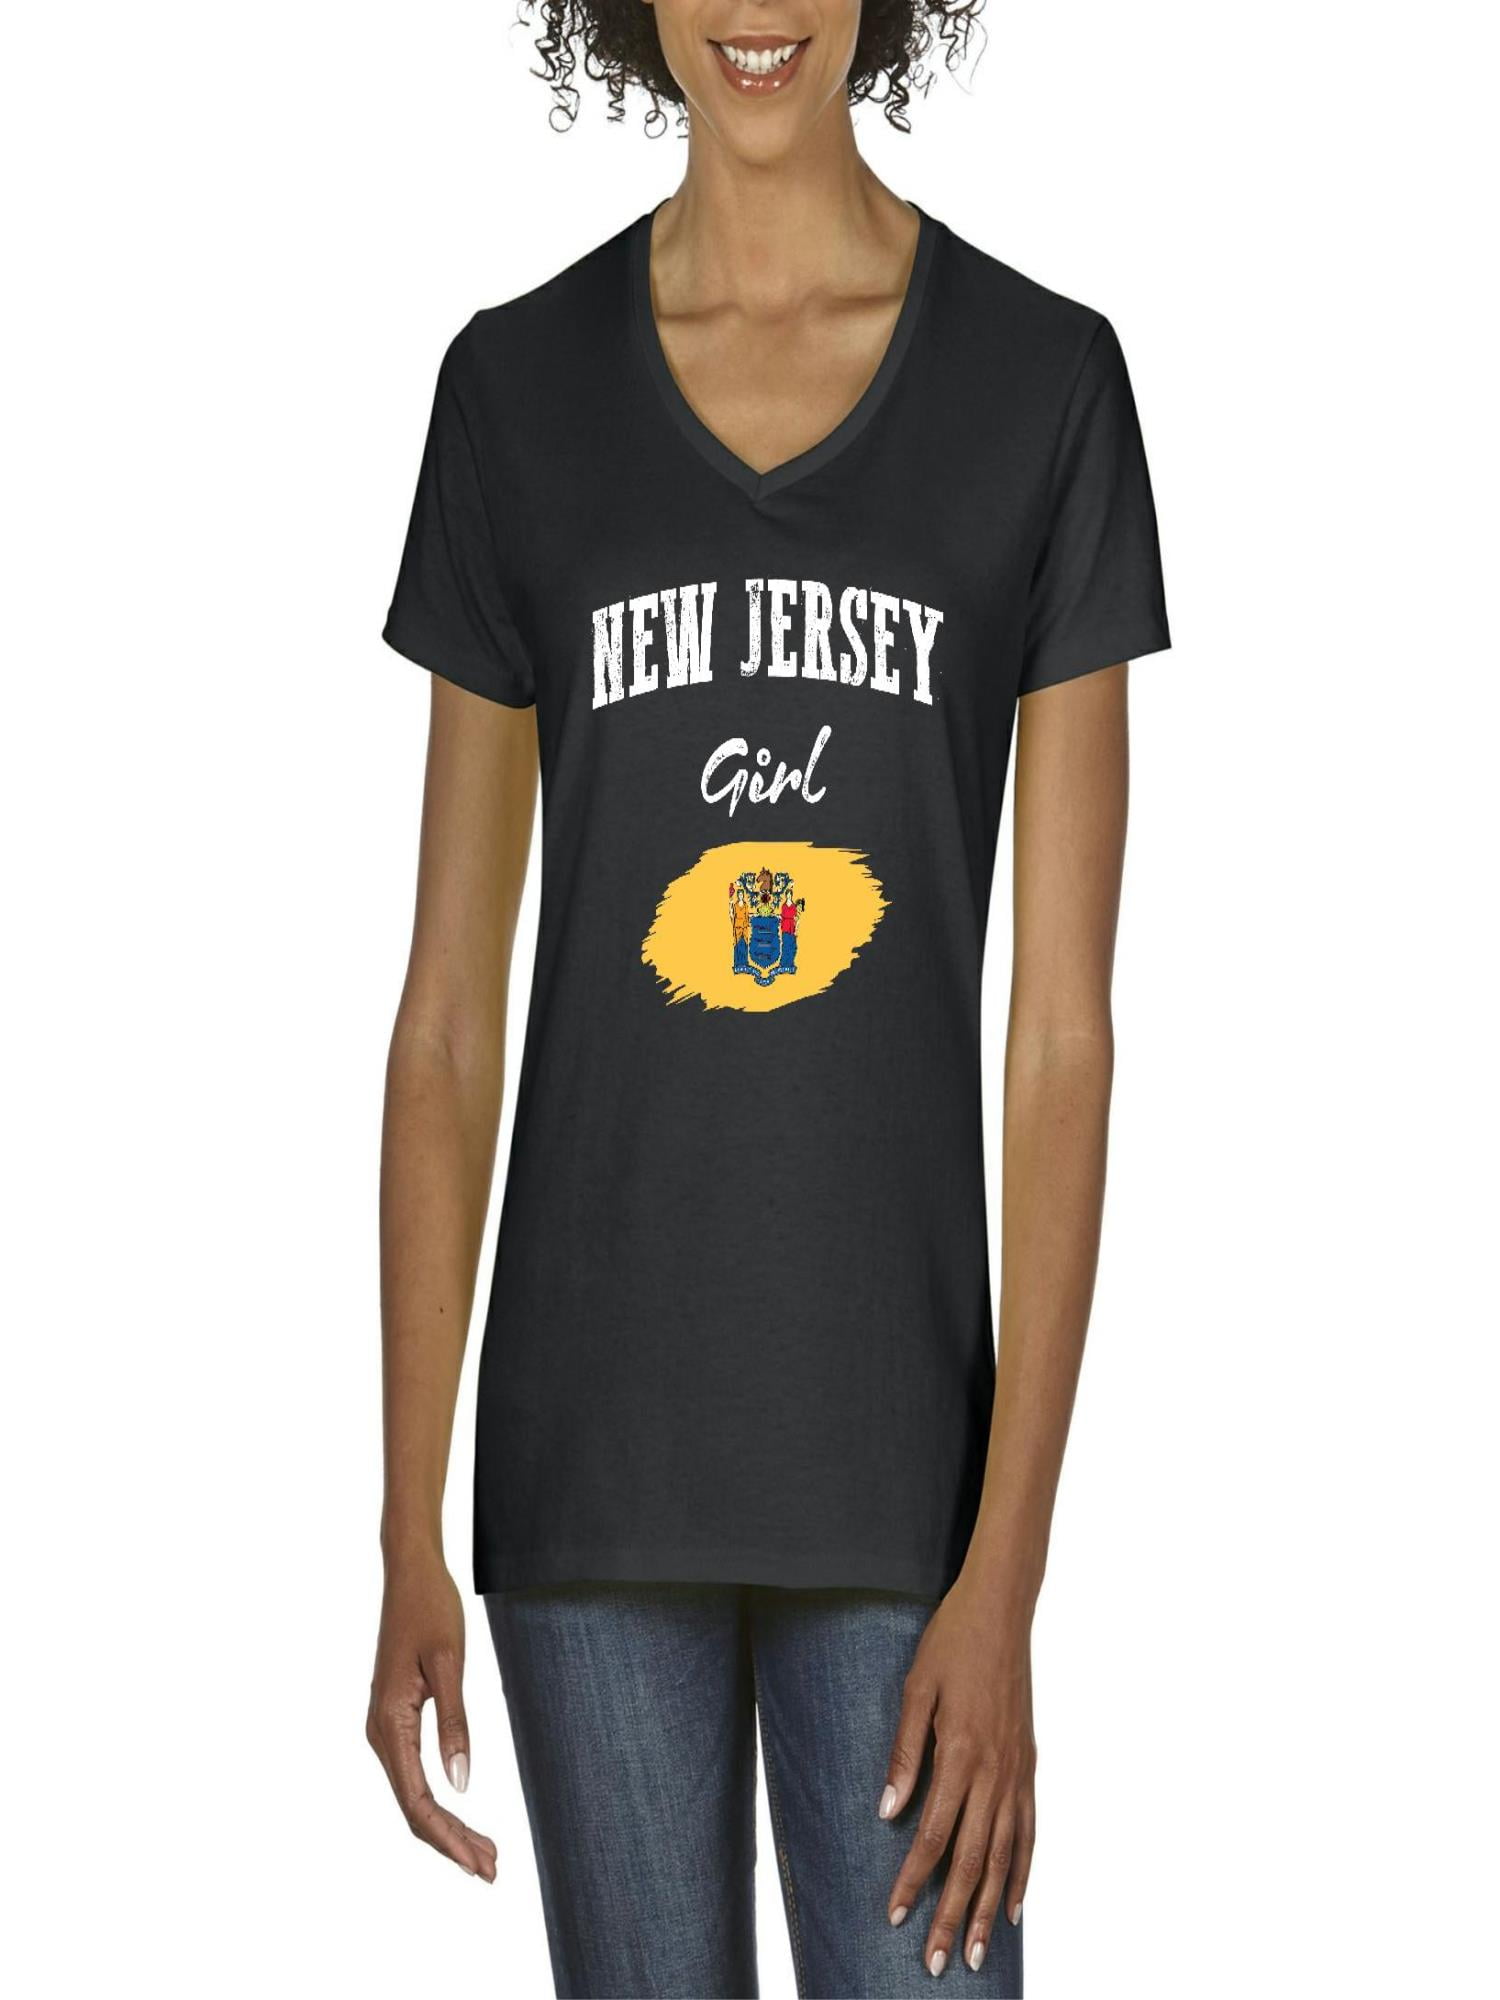 new jersey girl t shirts